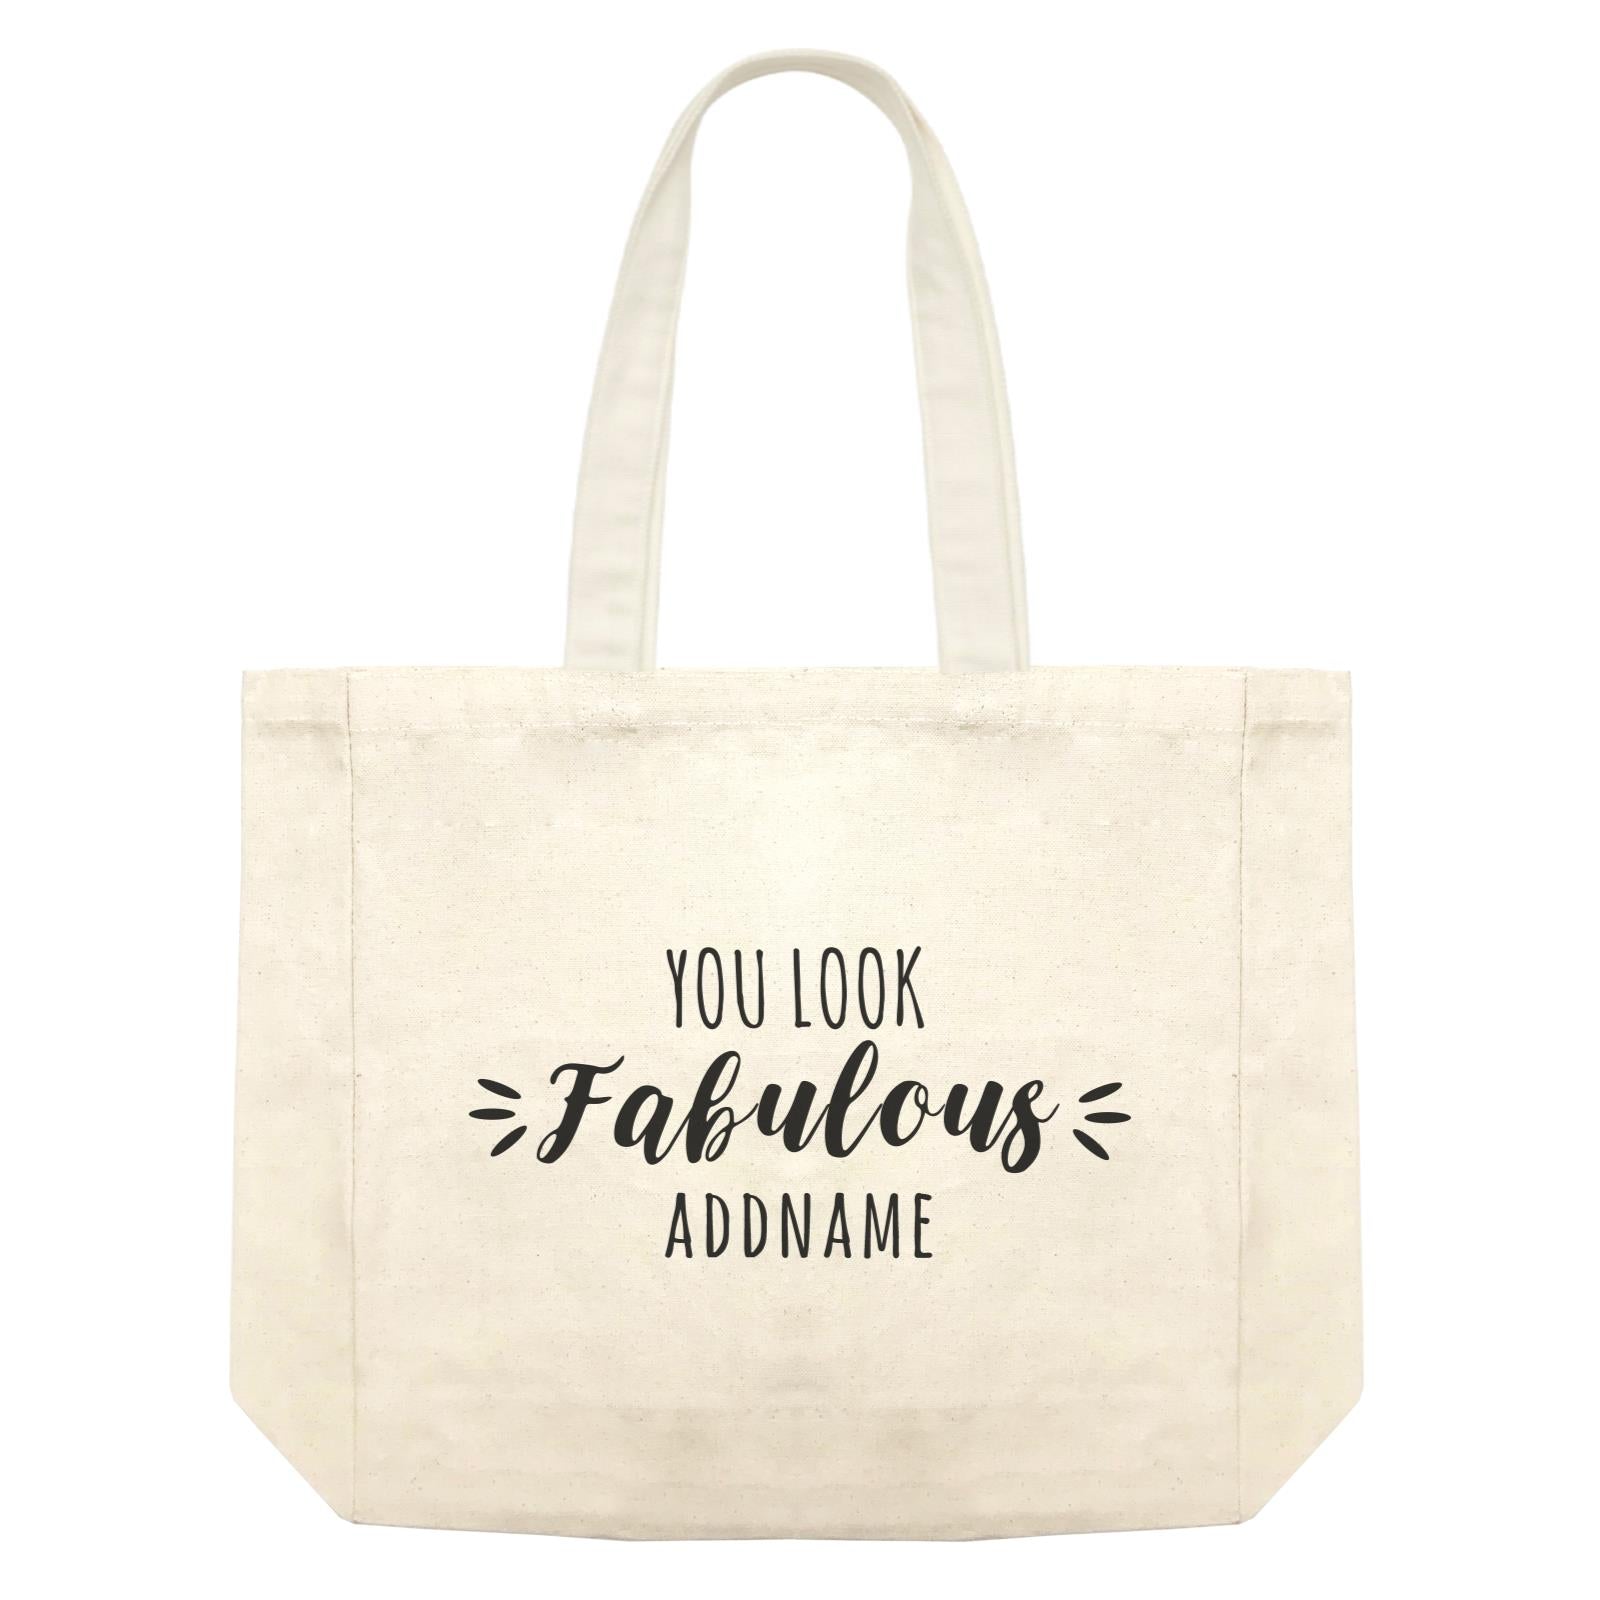 Best Friends Quotes You Look Fabulous Addname Shopping Bag